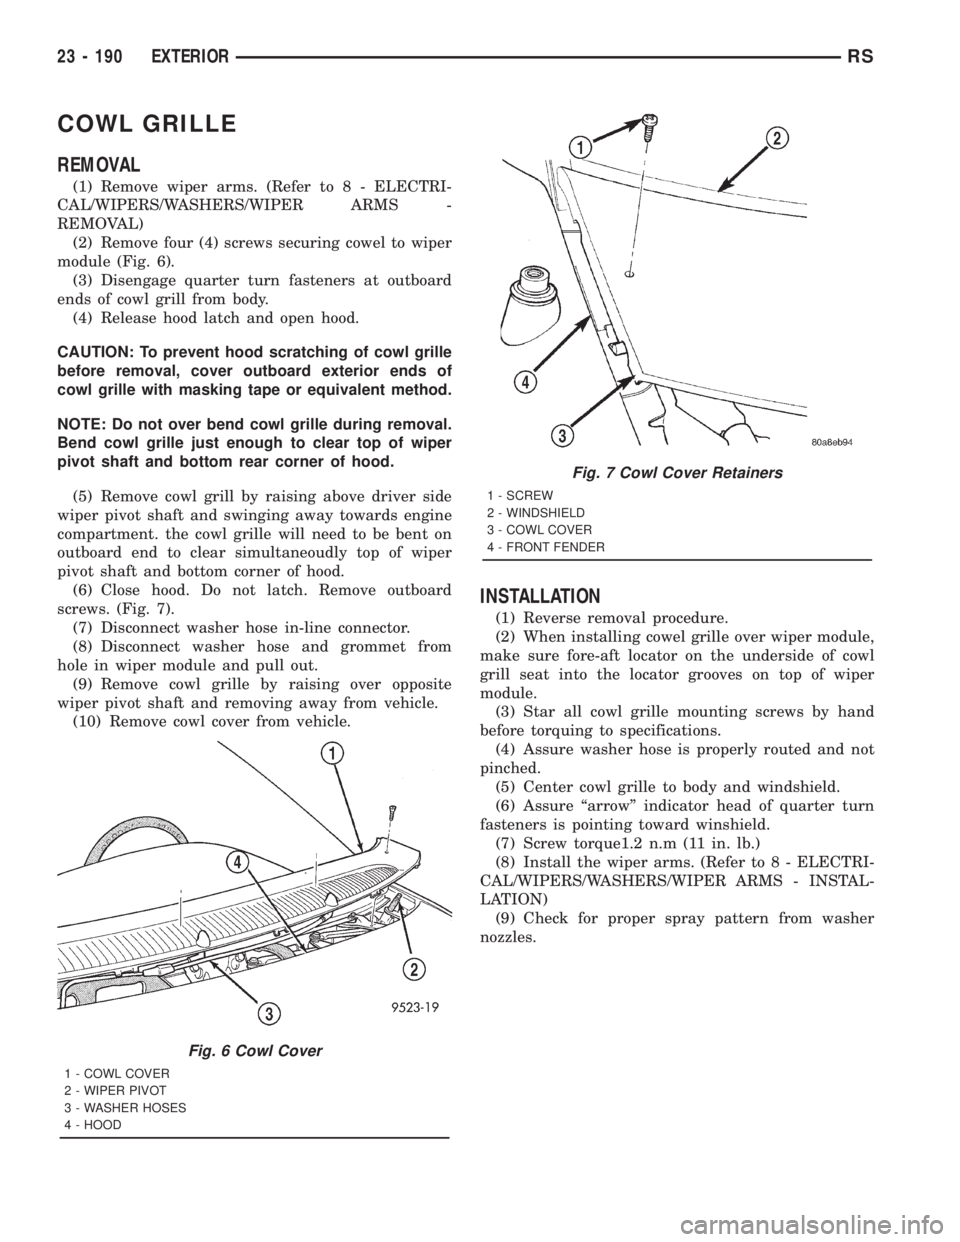 CHRYSLER VOYAGER 2001  Service Manual COWL GRILLE
REMOVAL
(1) Remove wiper arms. (Refer to 8 - ELECTRI-
CAL/WIPERS/WASHERS/WIPER ARMS -
REMOVAL)
(2) Remove four (4) screws securing cowel to wiper
module (Fig. 6).
(3) Disengage quarter tur